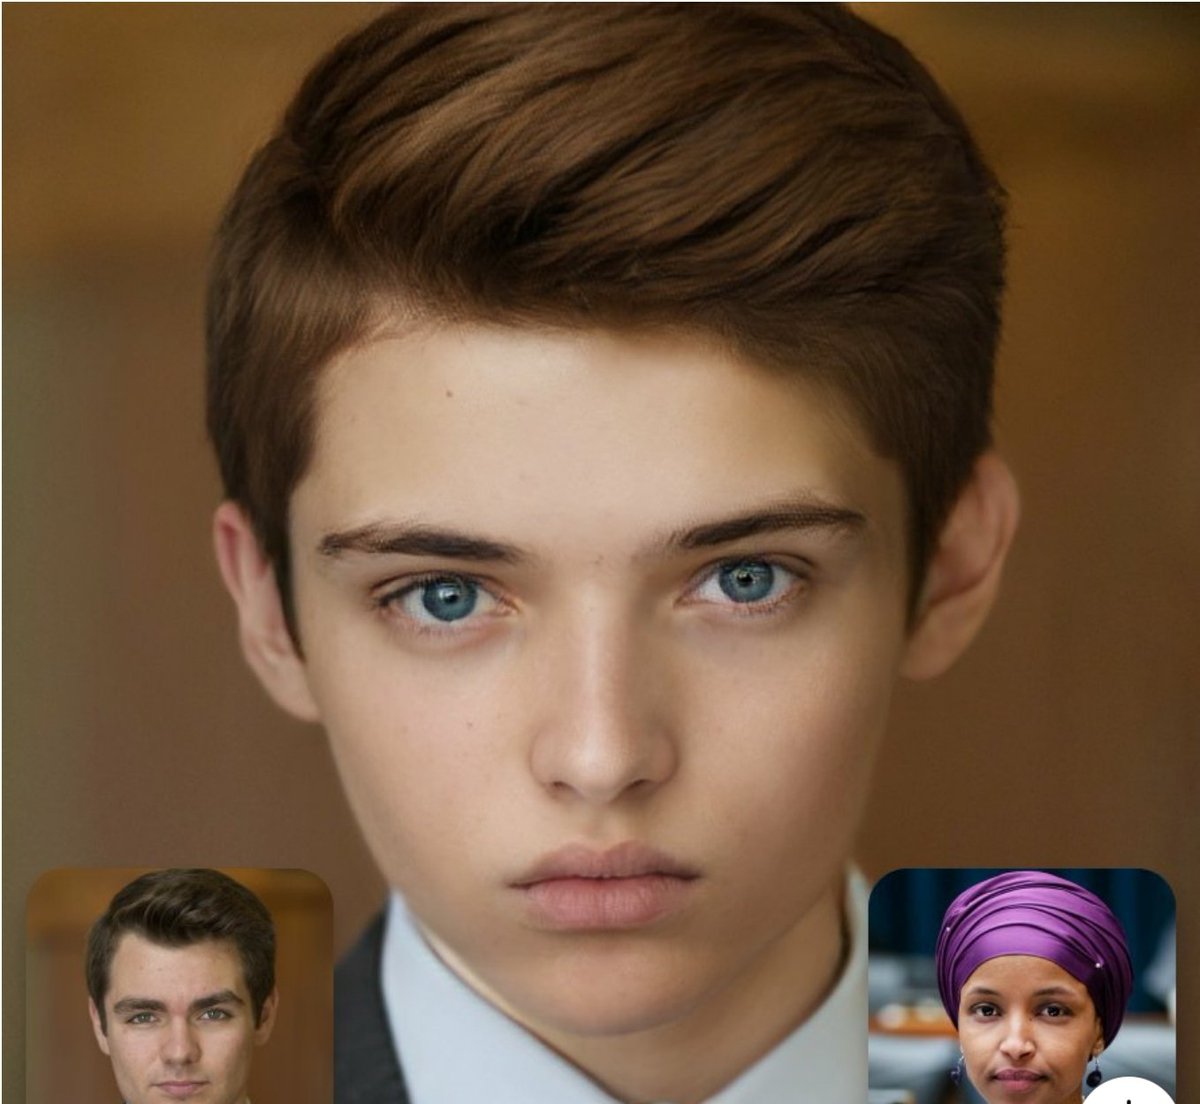 Nick Fuentes and Ilhan Omar